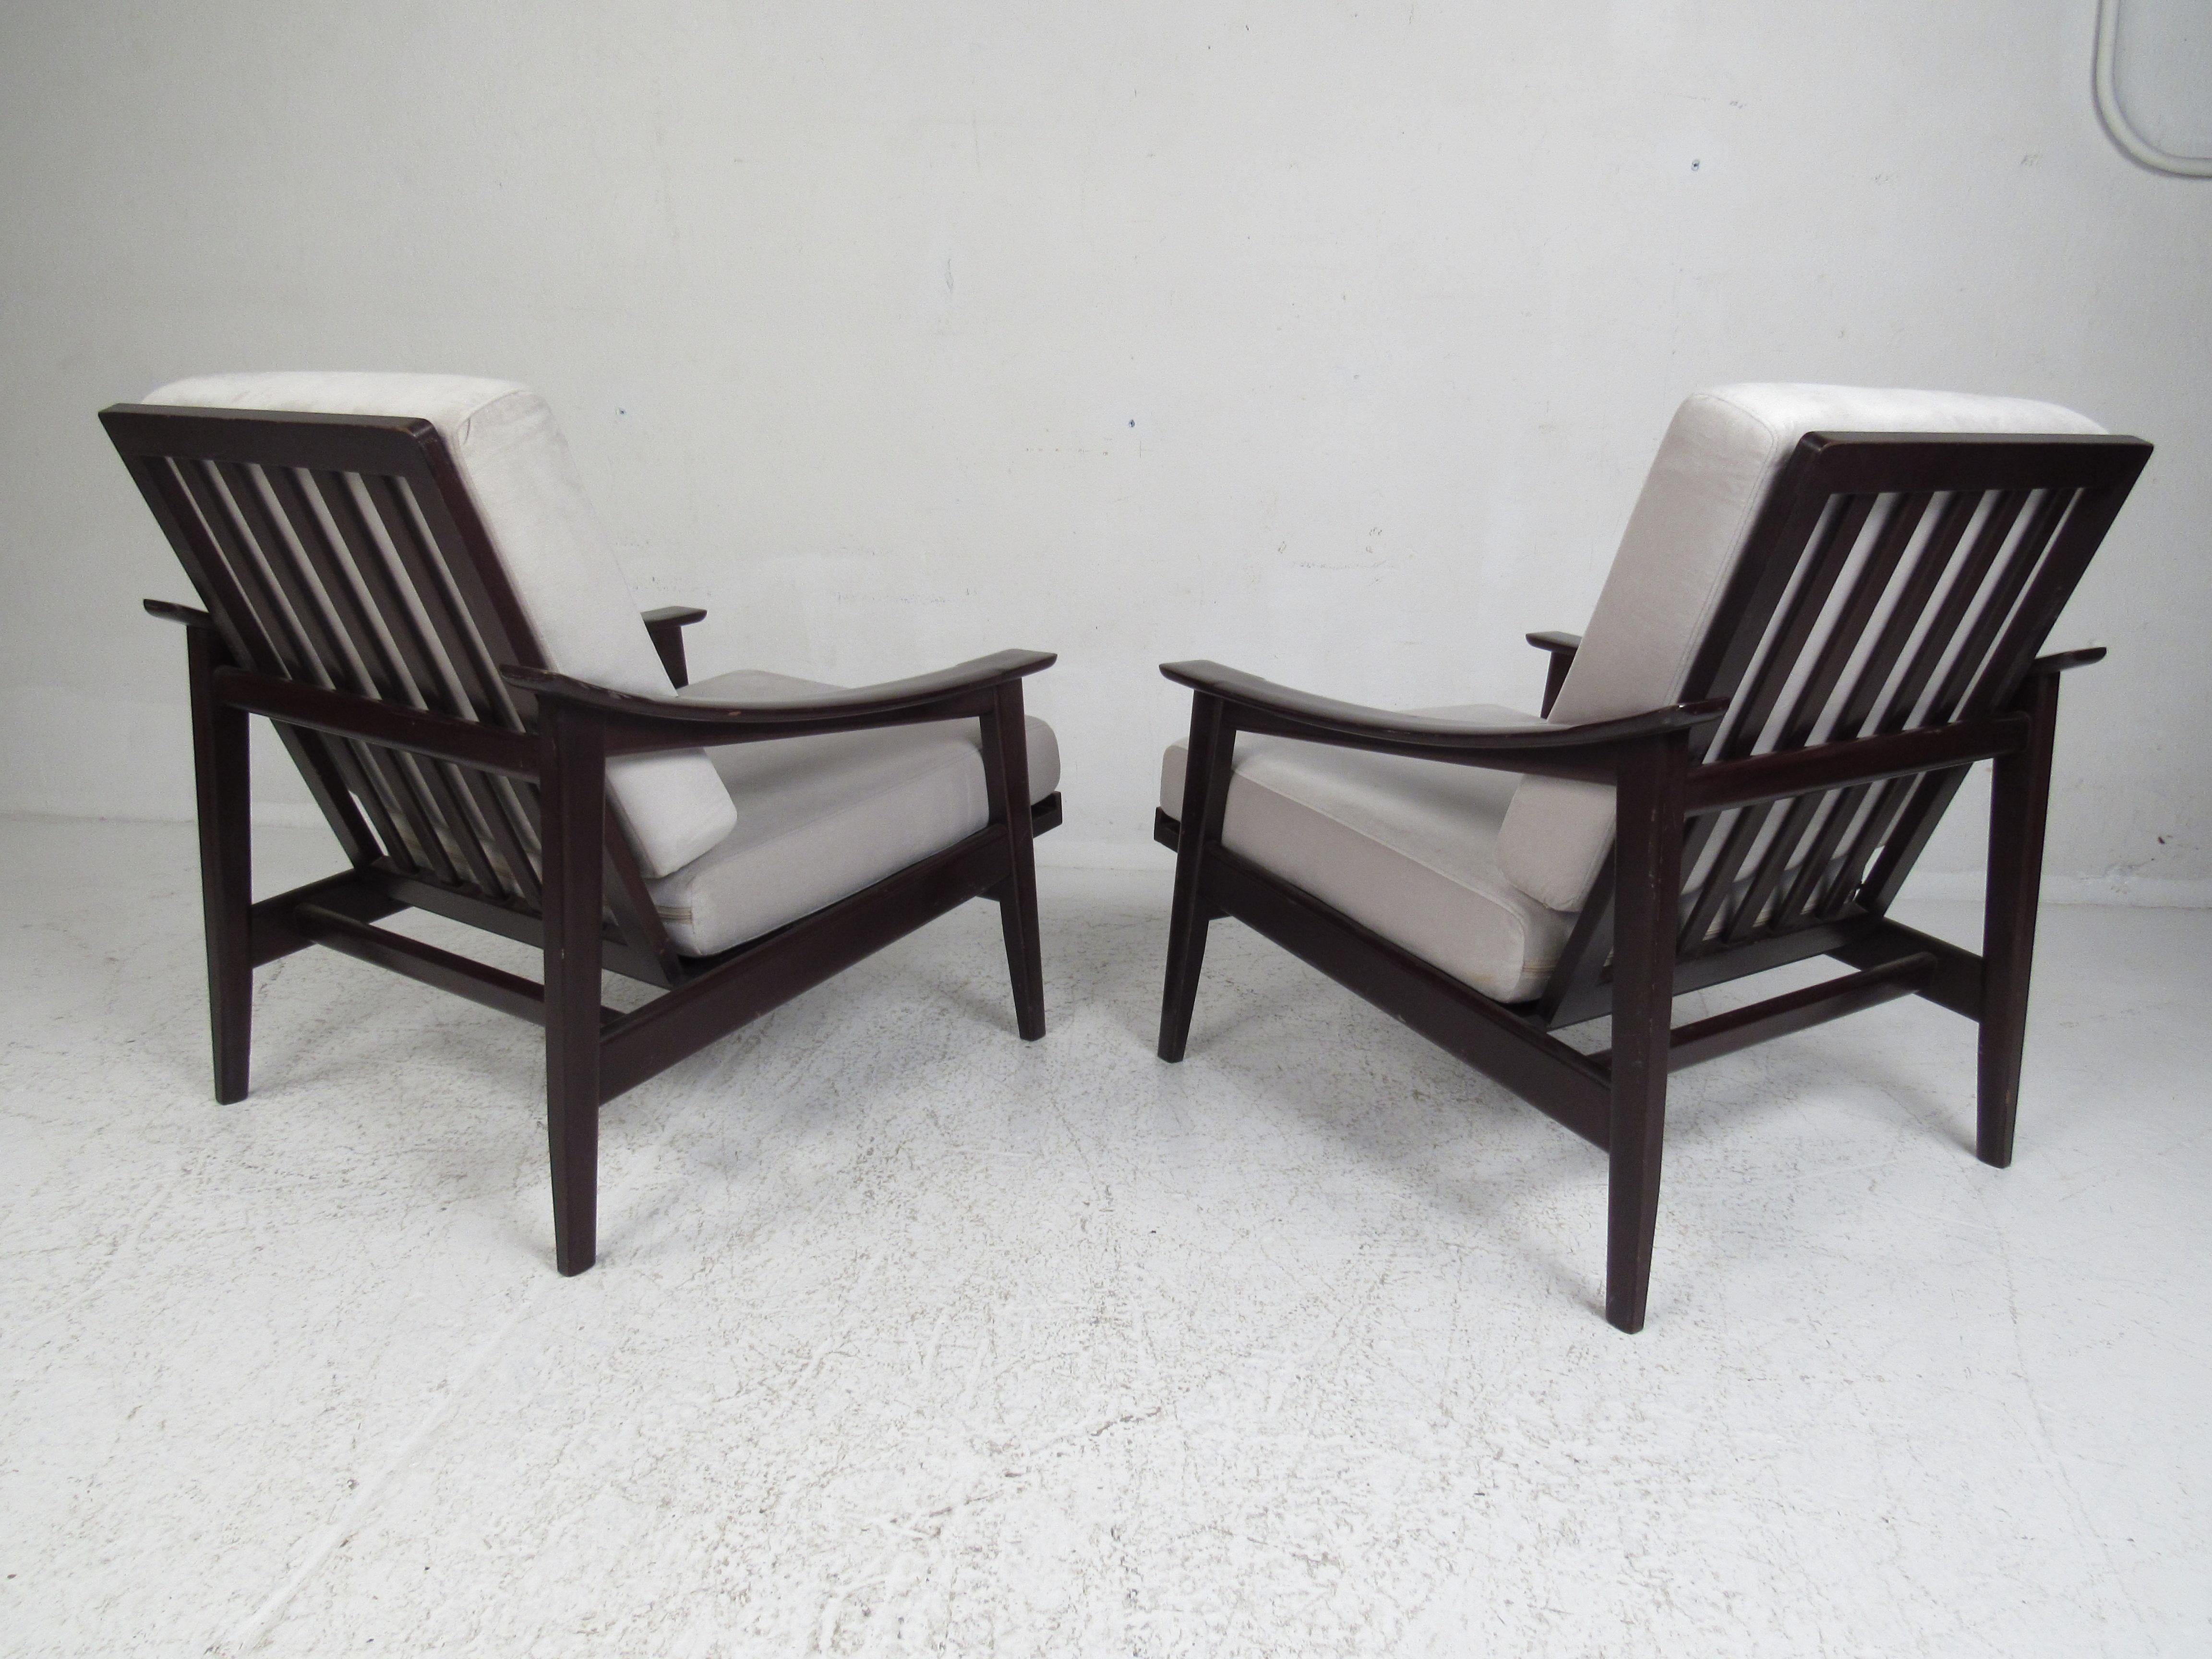 Mid-20th Century Pair of Vintage Italian Modern Reclining Lounge Chairs For Sale